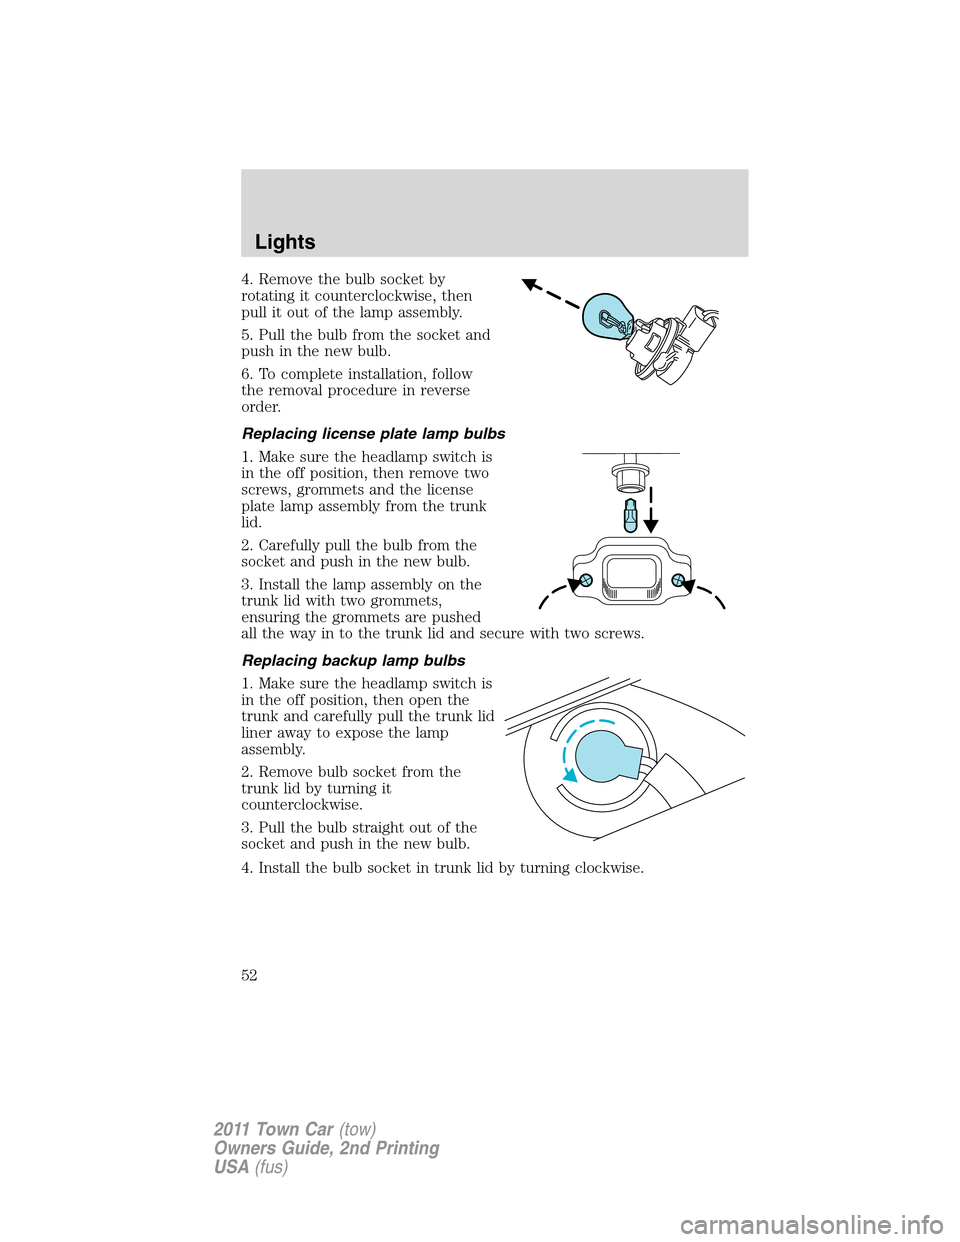 LINCOLN TOWN CAR 2011 User Guide 4. Remove the bulb socket by
rotating it counterclockwise, then
pull it out of the lamp assembly.
5. Pull the bulb from the socket and
push in the new bulb.
6. To complete installation, follow
the rem